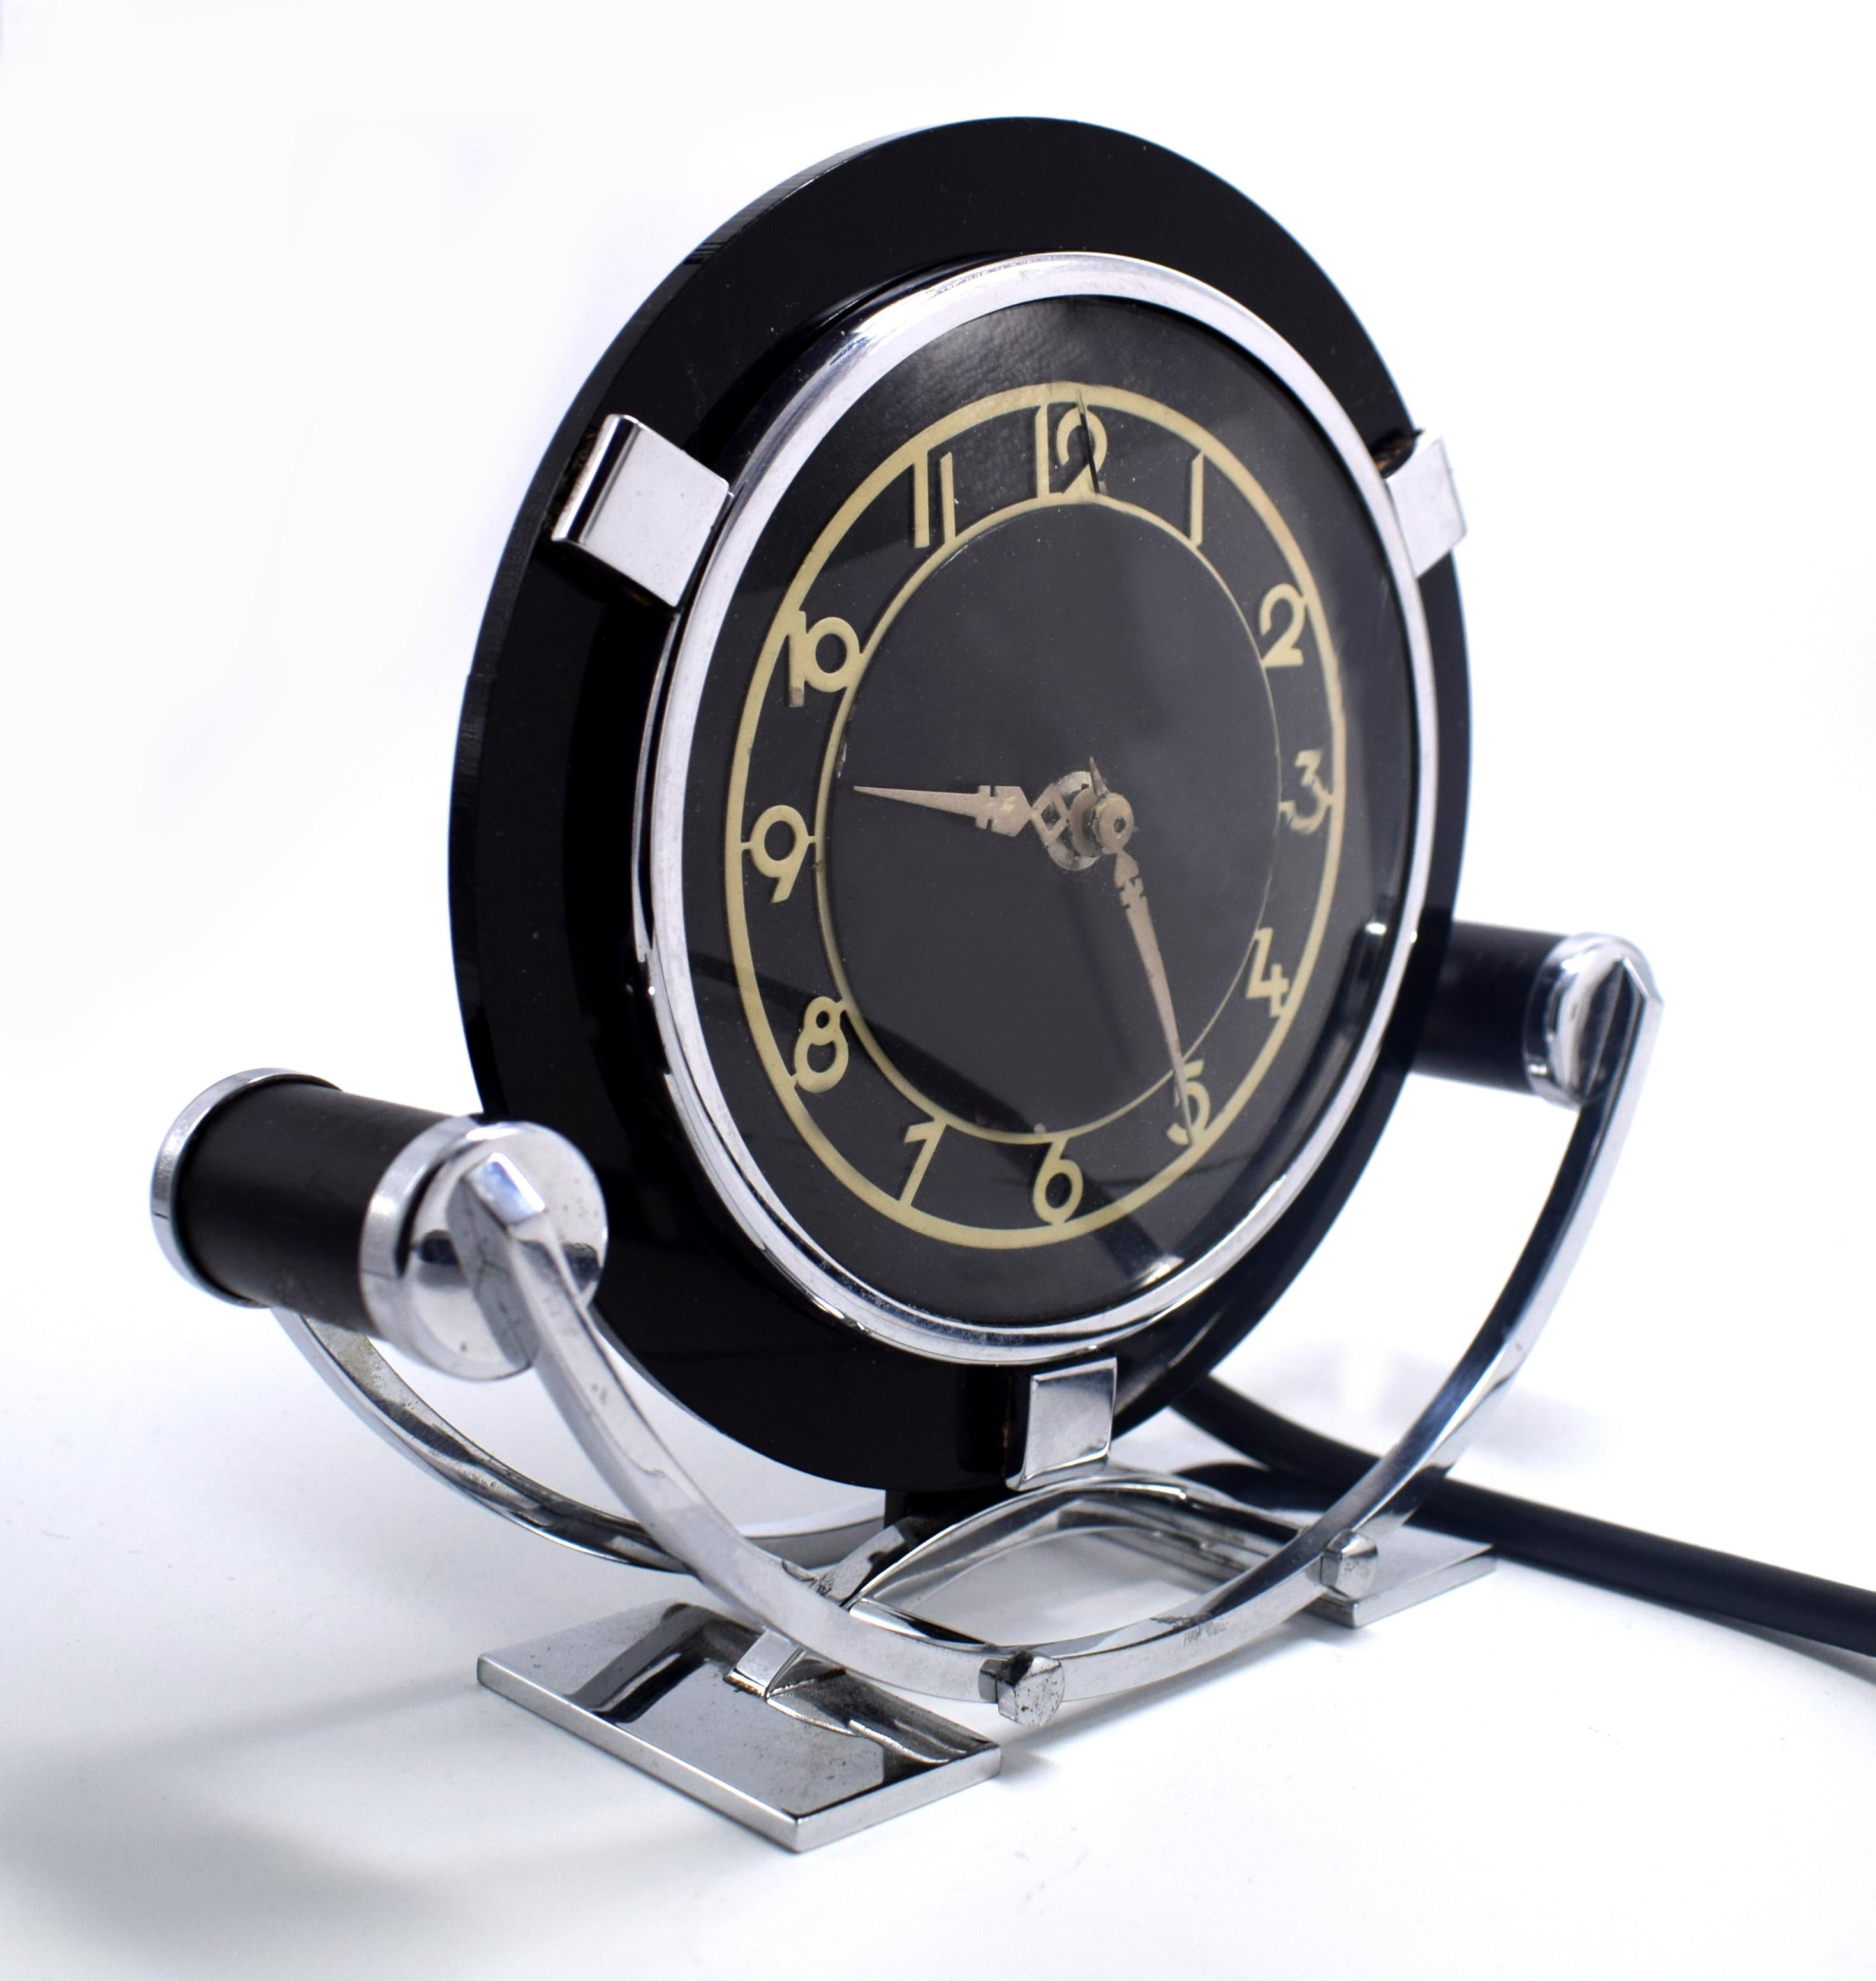 Extremely stylish 1930s Art Deco Smiths clock produced in the 1930s and called 'The Newport'. This is a clean, fine example of this rare clock , the glass is not chipped or damaged and the chrome is in excellent condition for it's age of 80 plus